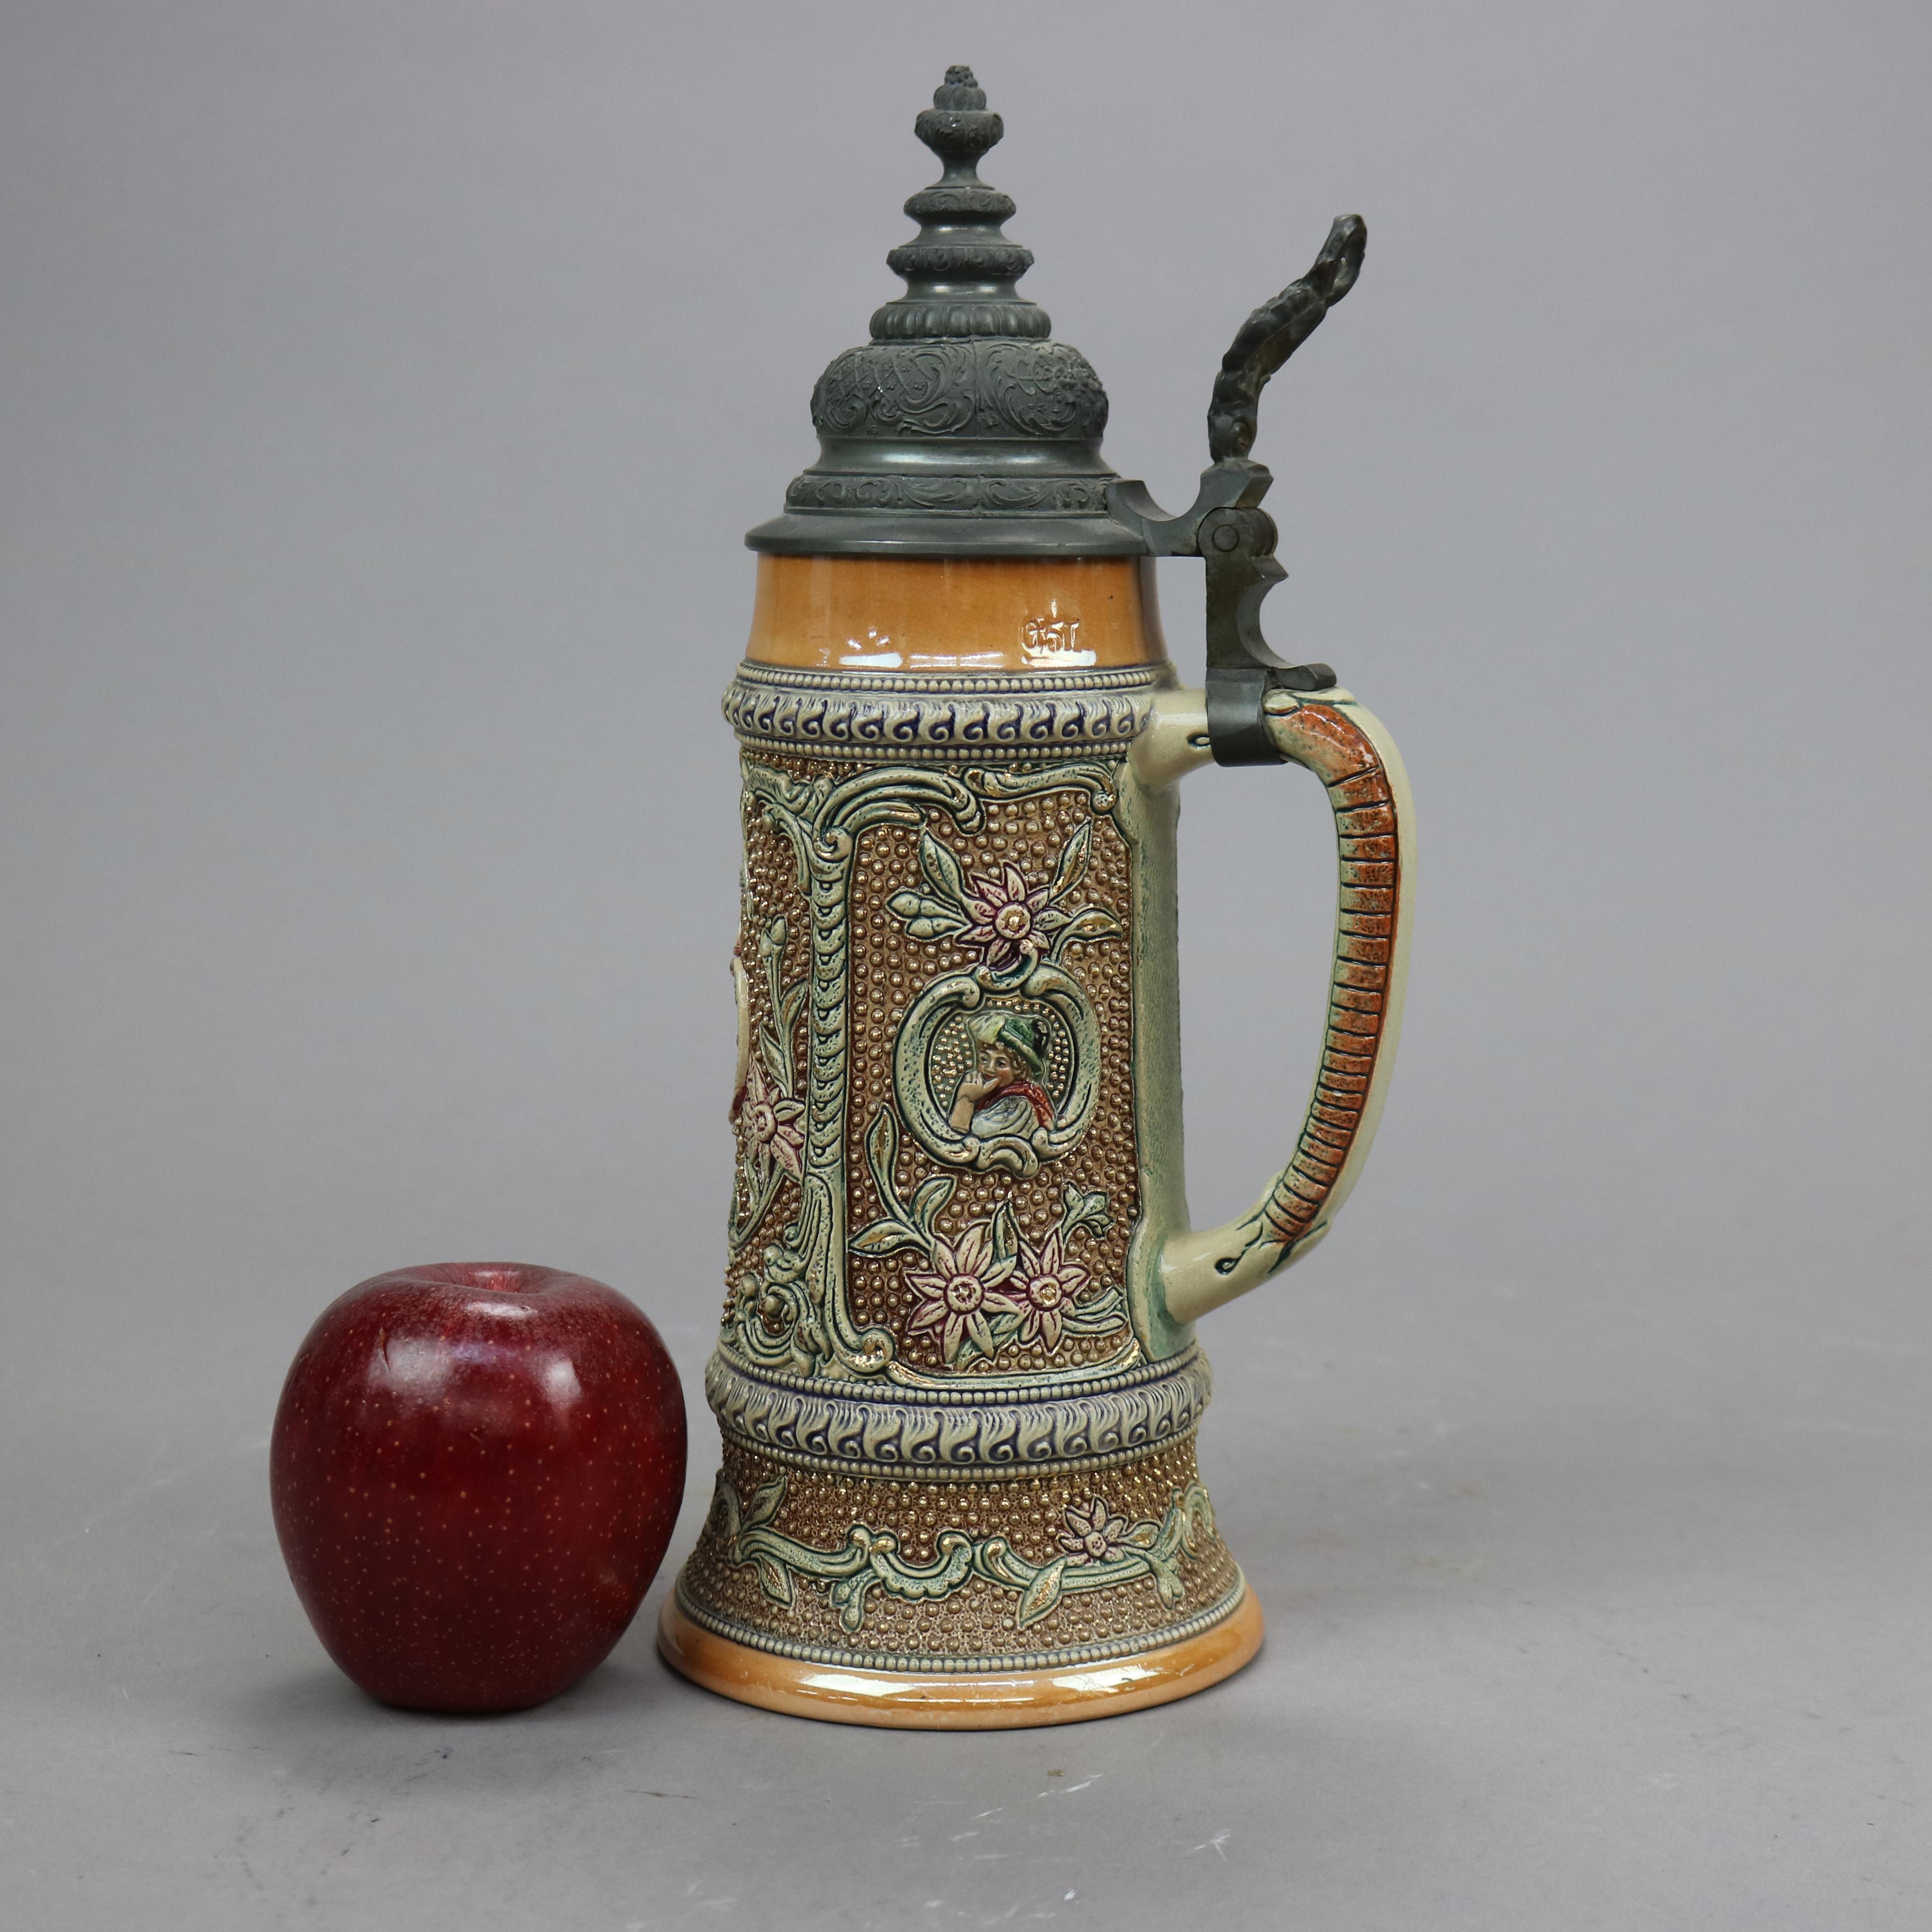 An antique and large German beer stein offers stoneware construction with reserves having figural portraits, flowers and foliate elements in relief, hinged pewter lid, c1900

Measures- 11.5'' H x 4.25'' W x 5.5'' D.

Catalogue Note: Ask about